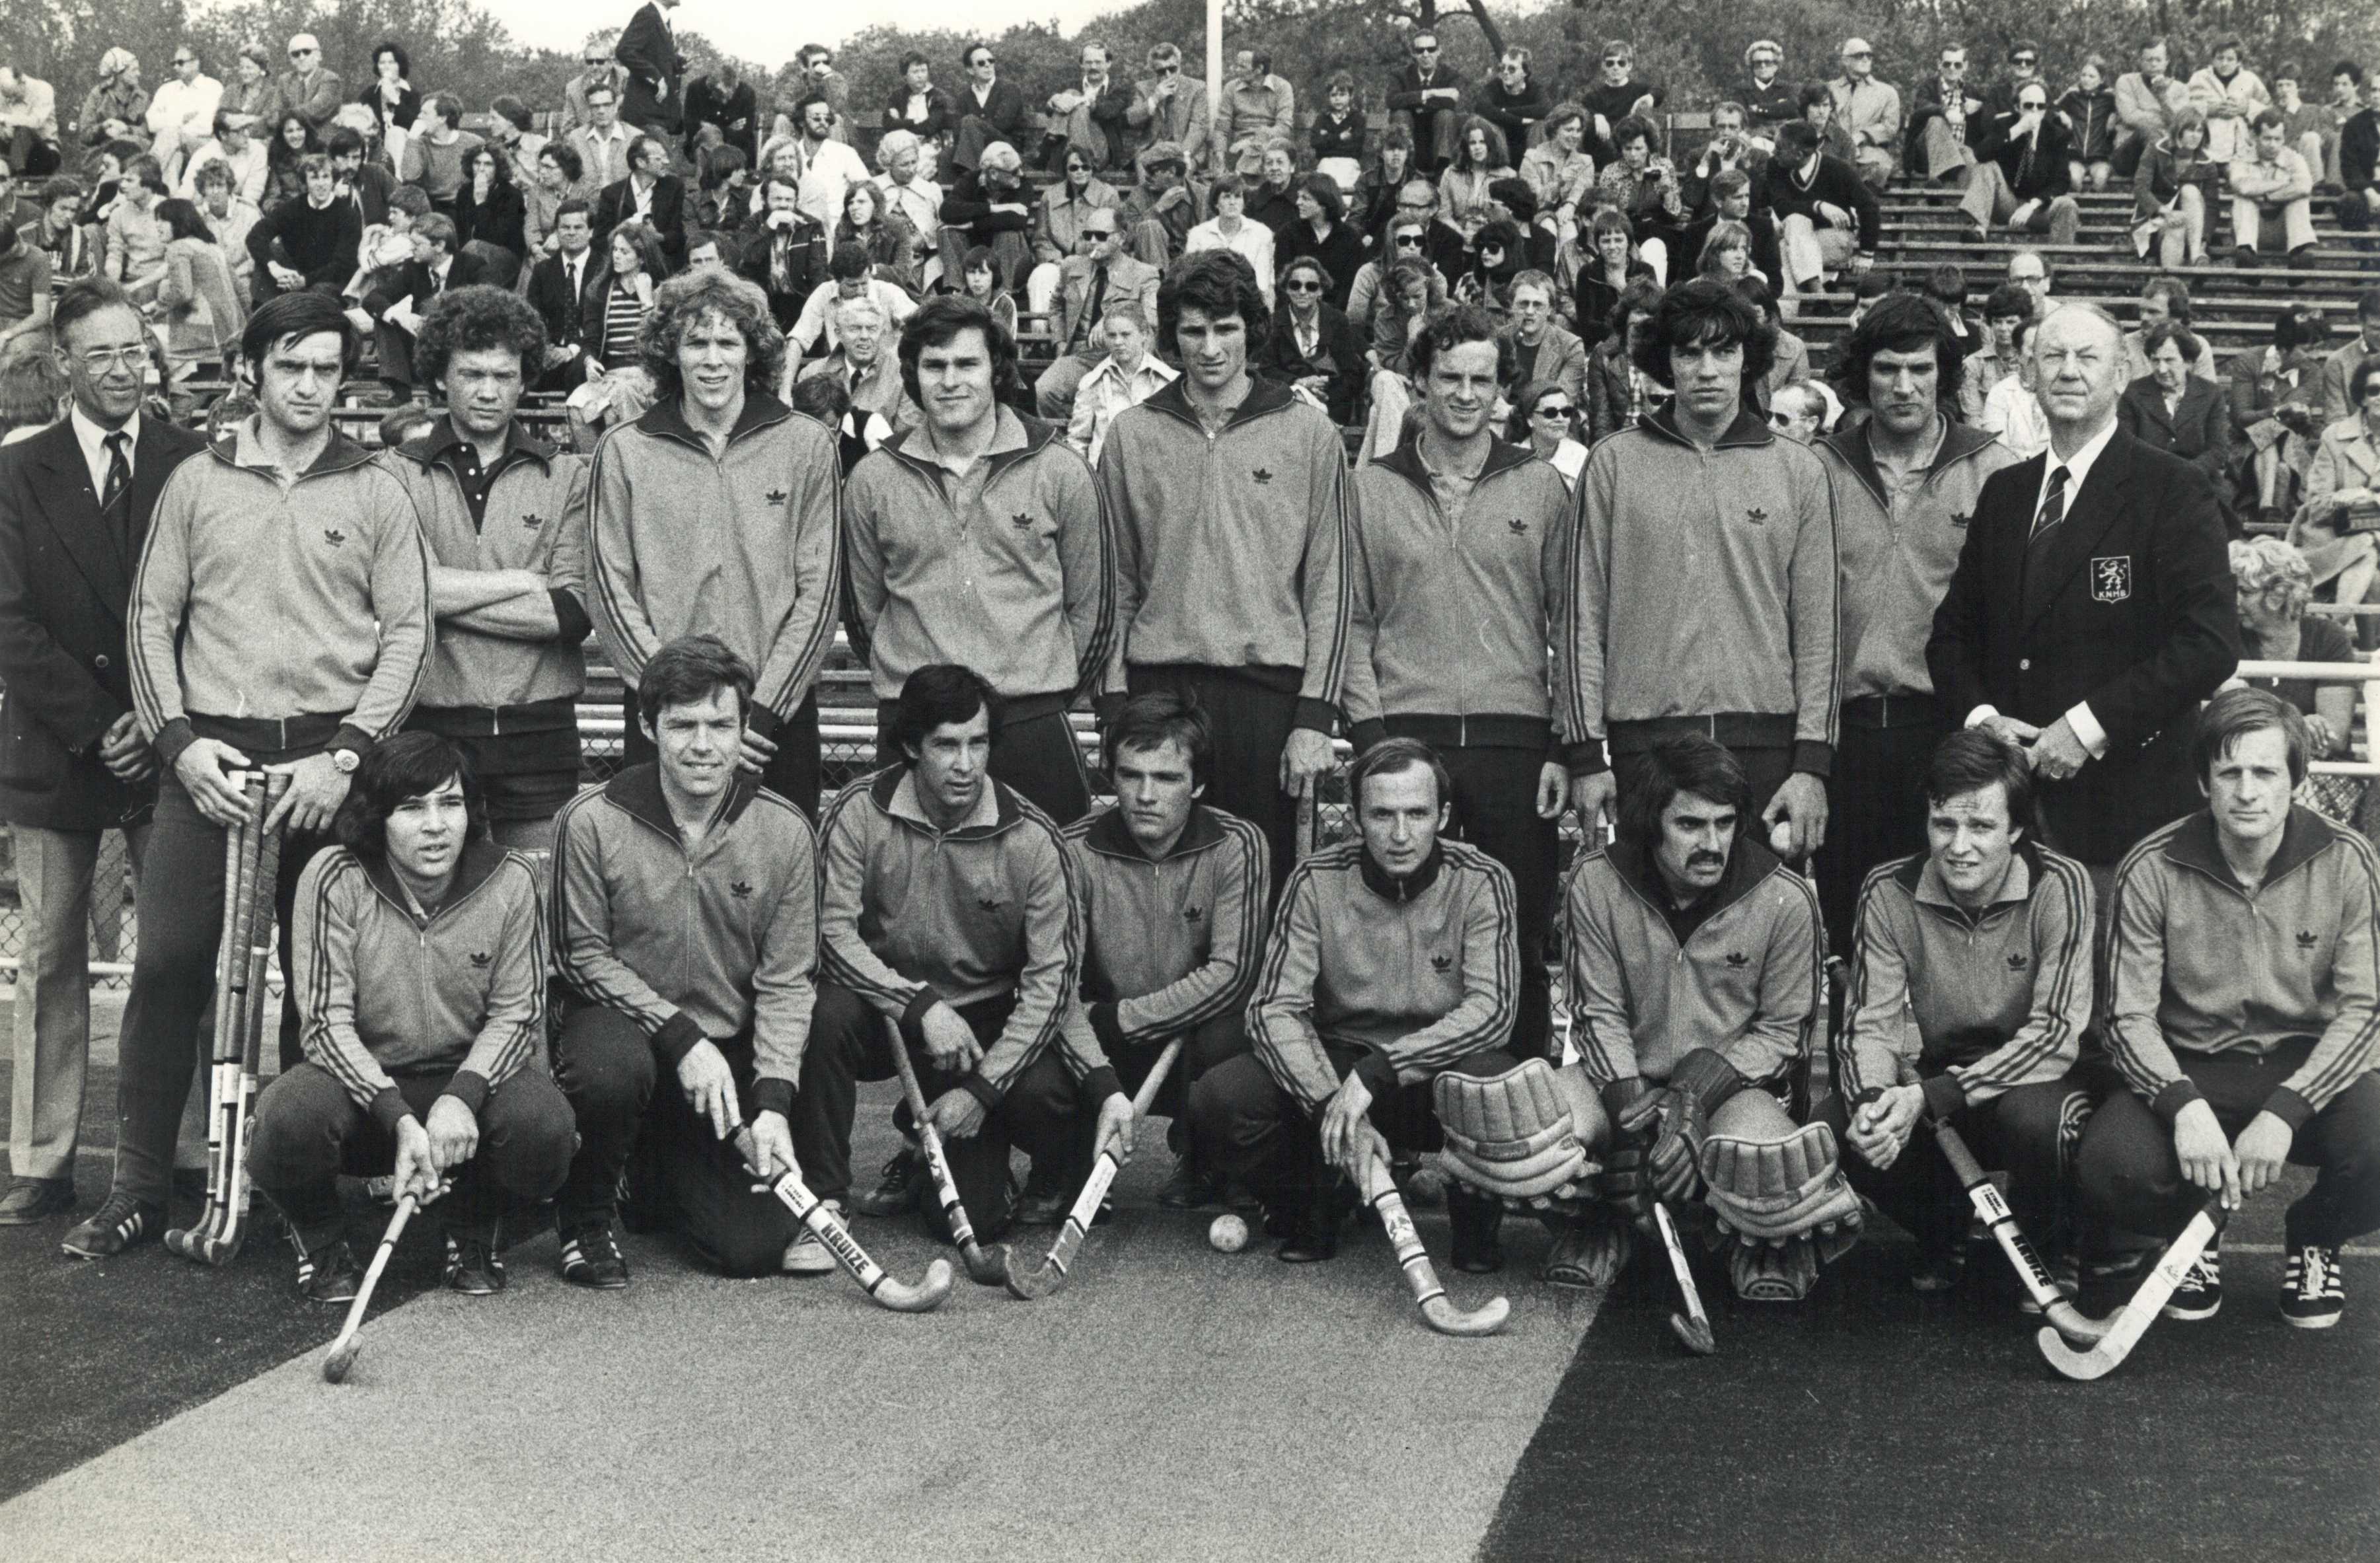 staand vlnr Jules Ancion ( manager ), Andr Bolhuis, Maarten Sikkingh, Hans Jorritsma, Hans Kruize, Wouter Kan, Imbert Jebbink, Ron Steens, Paul Litjens, Wim van Heumen ( coach ); vlnr gehurkt Tim Steens, Coen Kranenberg, Wouter Leefers, Theodoor Doyer, Geer van Eijck, Rob Toft, Jan Albers, Bart Taminiau.